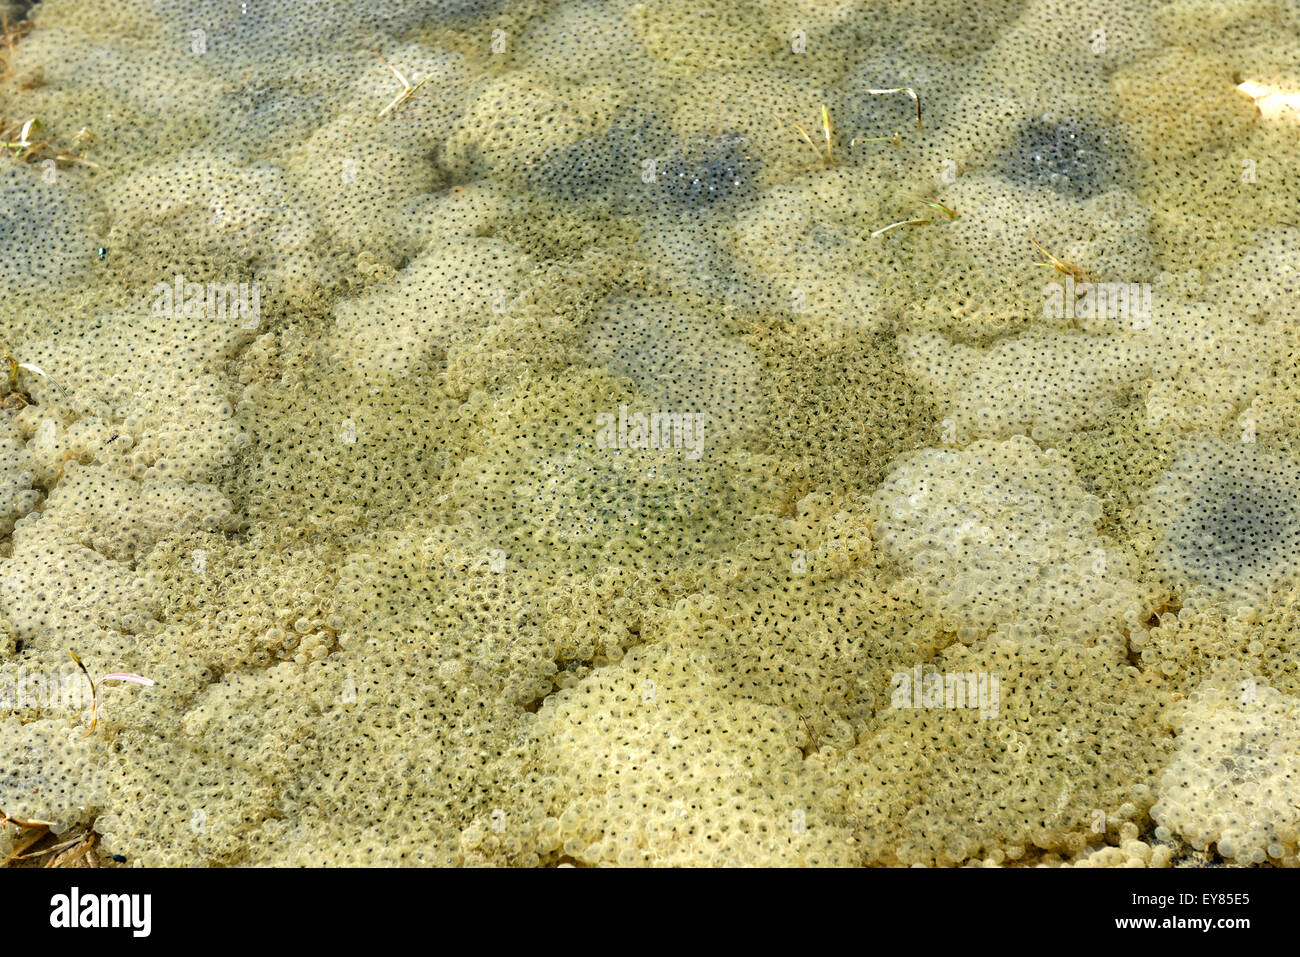 Puddle of water full of spawn, frog eggs, Upper Bavaria, Bavaria, Germany Stock Photo